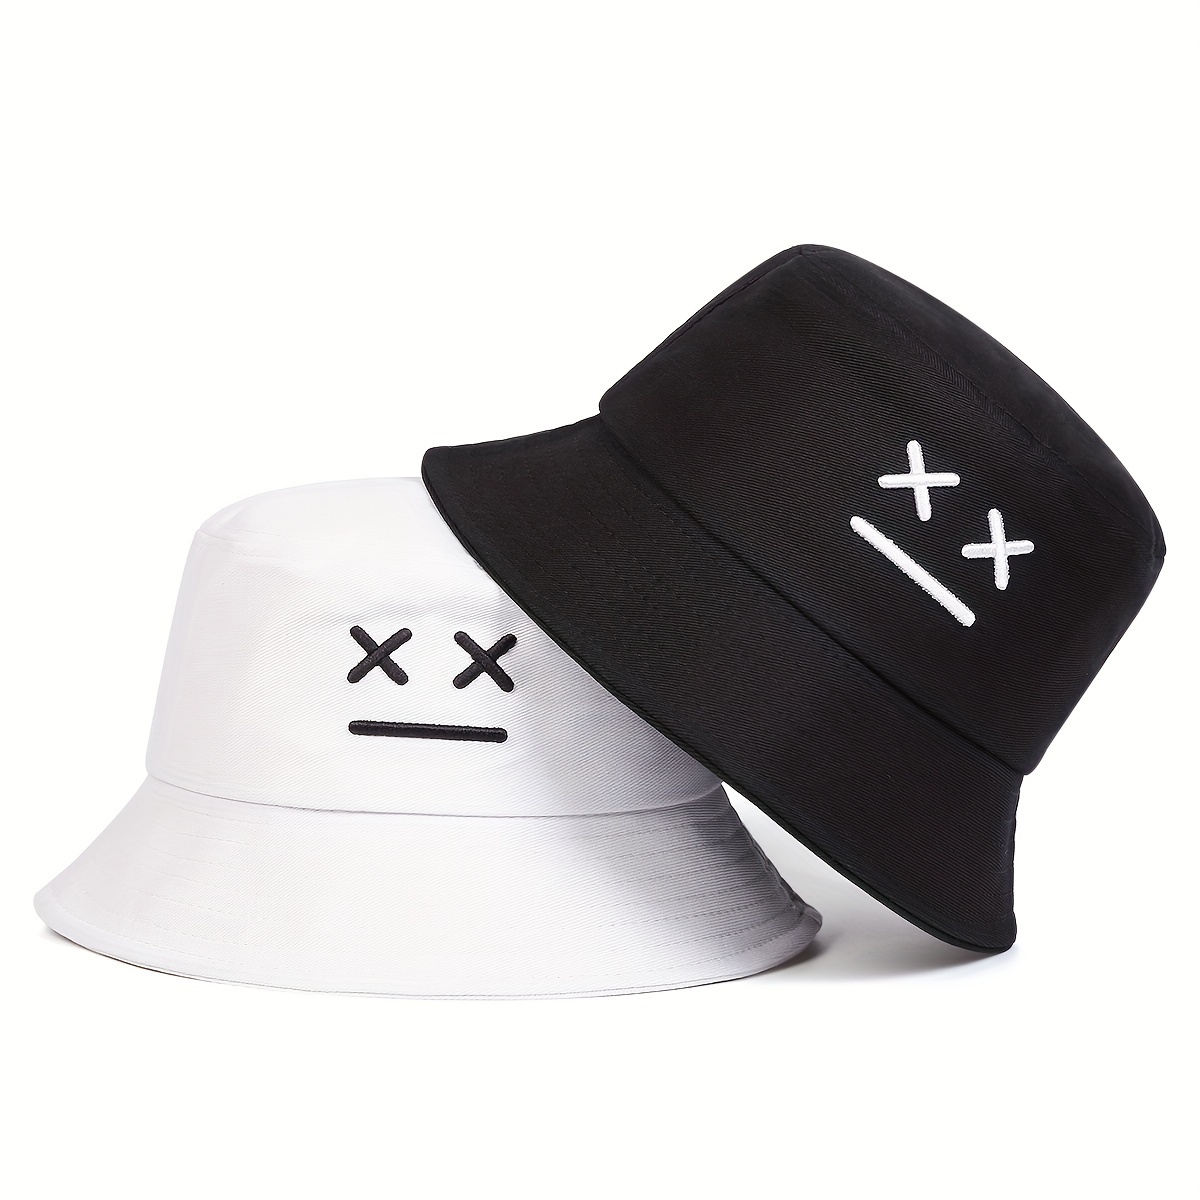 

Men's Xx Expression Bucket Hat - Funky Polyester Fashion Accessory With Slight Stretch, Hand Washable - Outdoor Sun Protection Casual Cap Perfect For Spring/fall Travel And Beach Parties